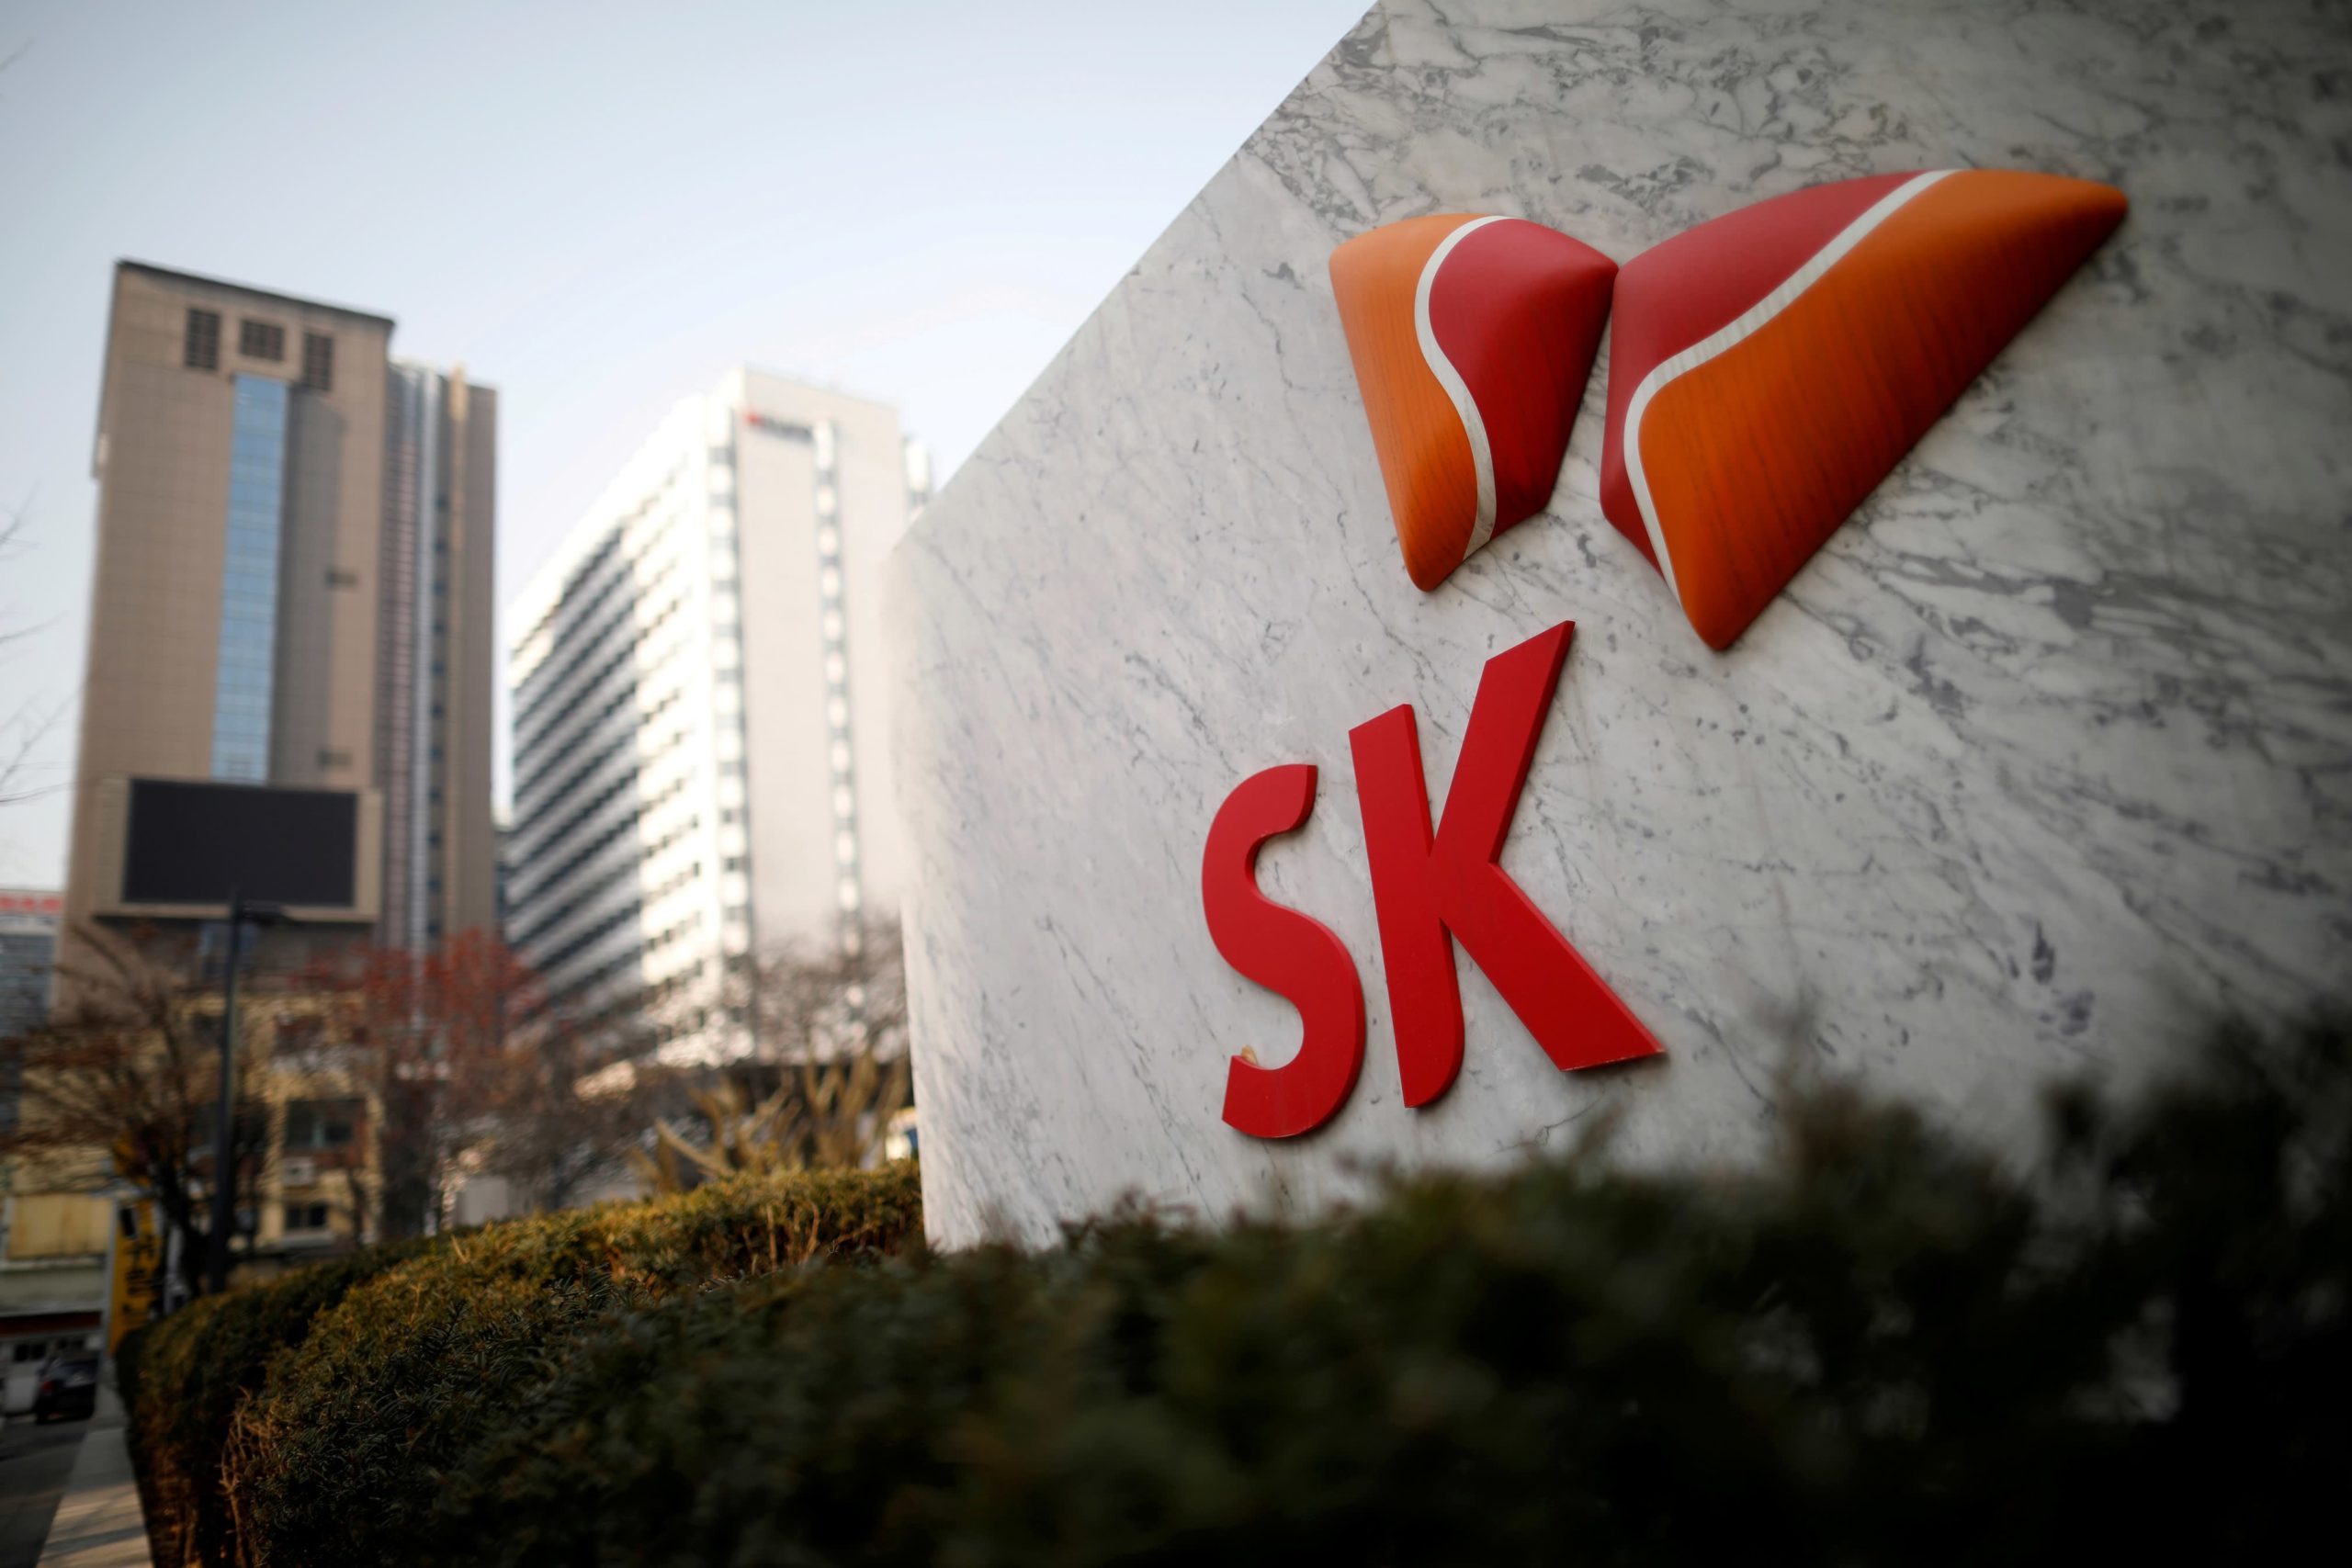 Korea's NPS, SK Group said to set up $860m fund to invest in Vietnam